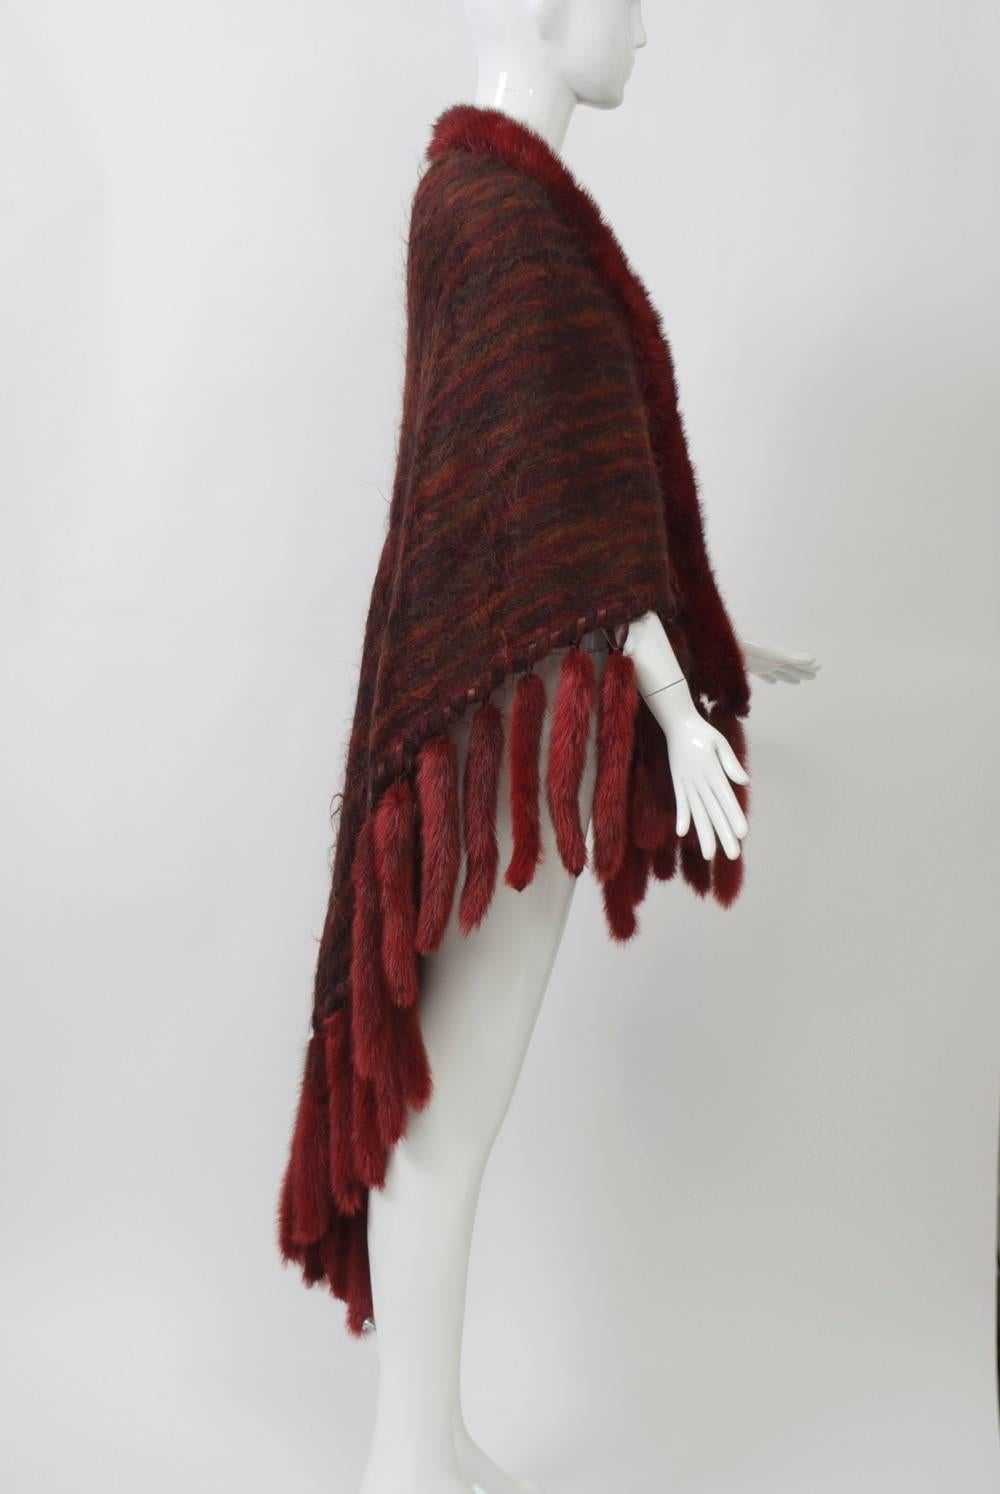 Deep shawl in striated orange/brown mohair trimmed with dyed matching mink around collar and mink tails around hem, which is whipstitched in brown leather.